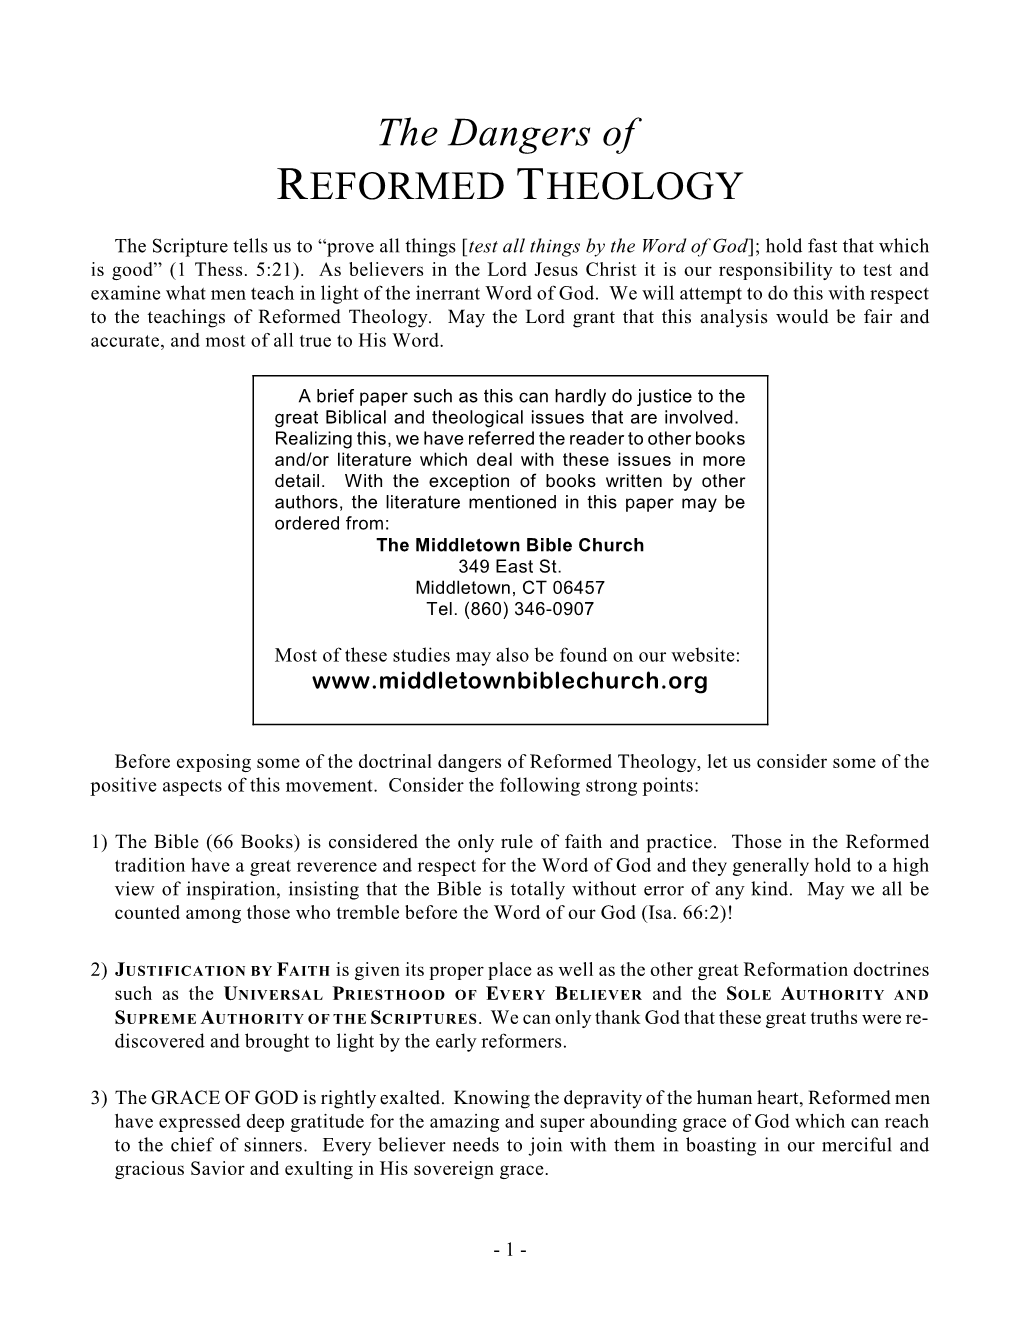 The Dangers of REFORMED THEOLOGY